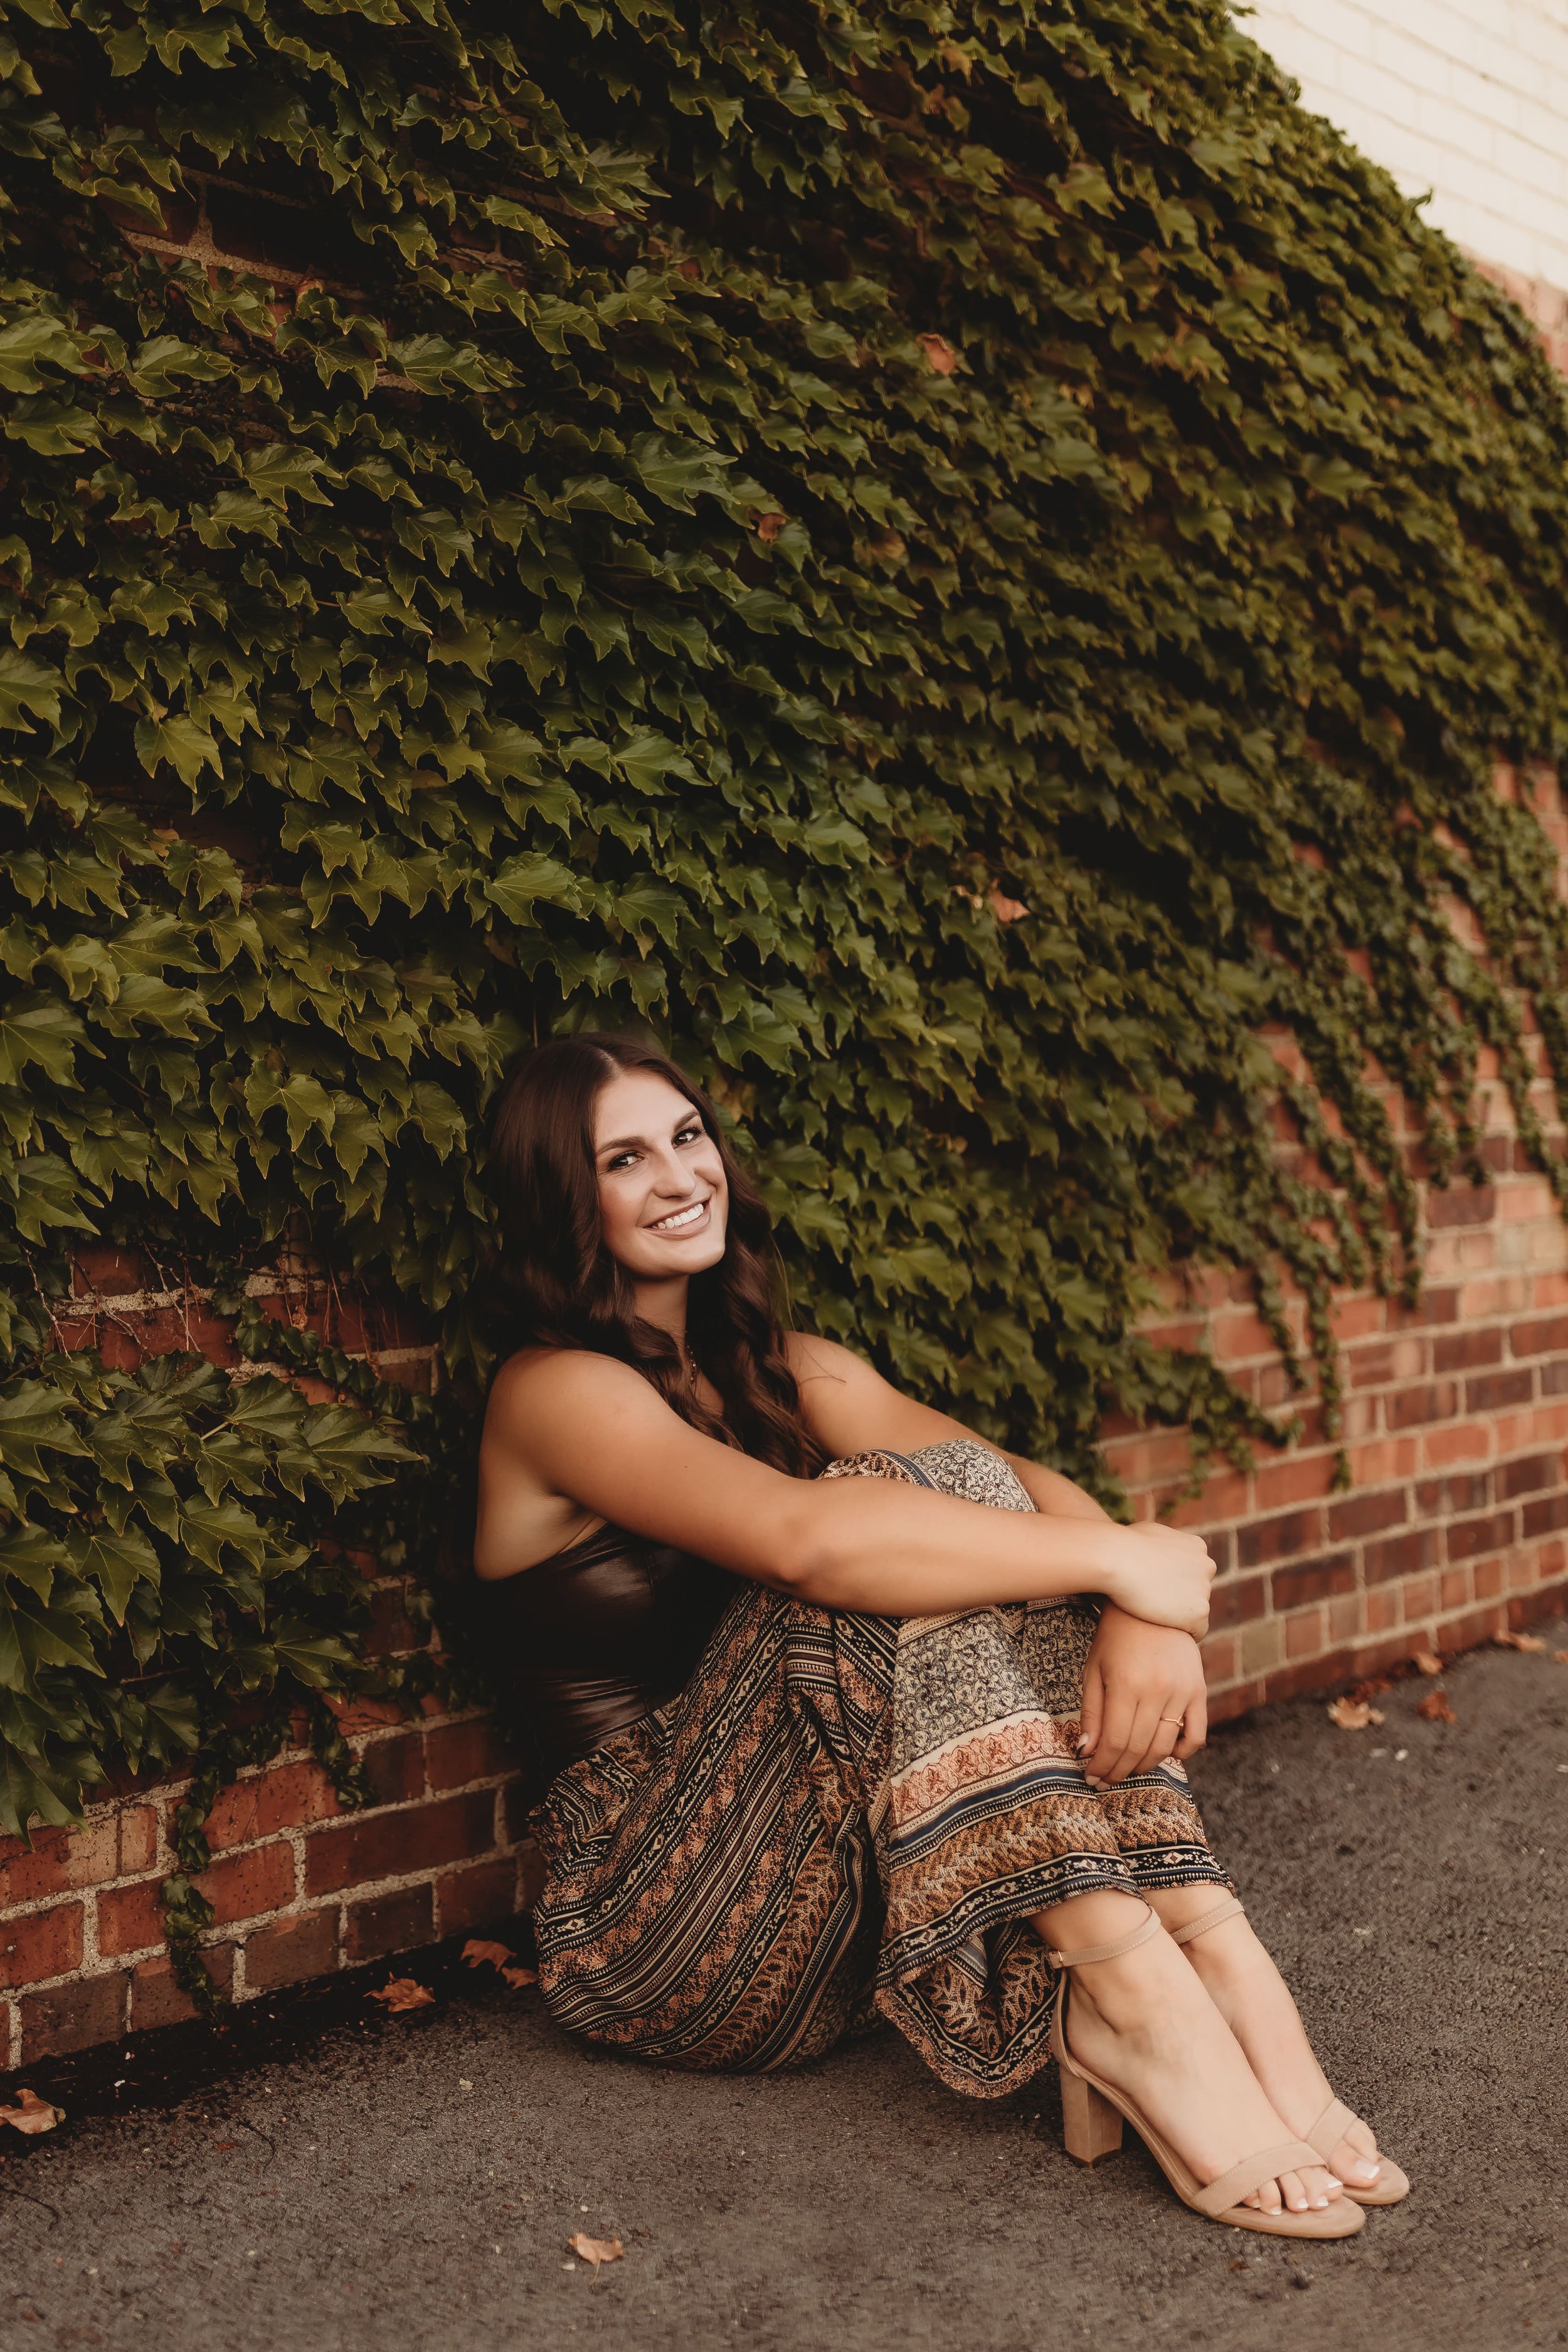  High school senior leans against a brick wall covered in ivy and smiles while holding her knees while posing for senior picture photographers 